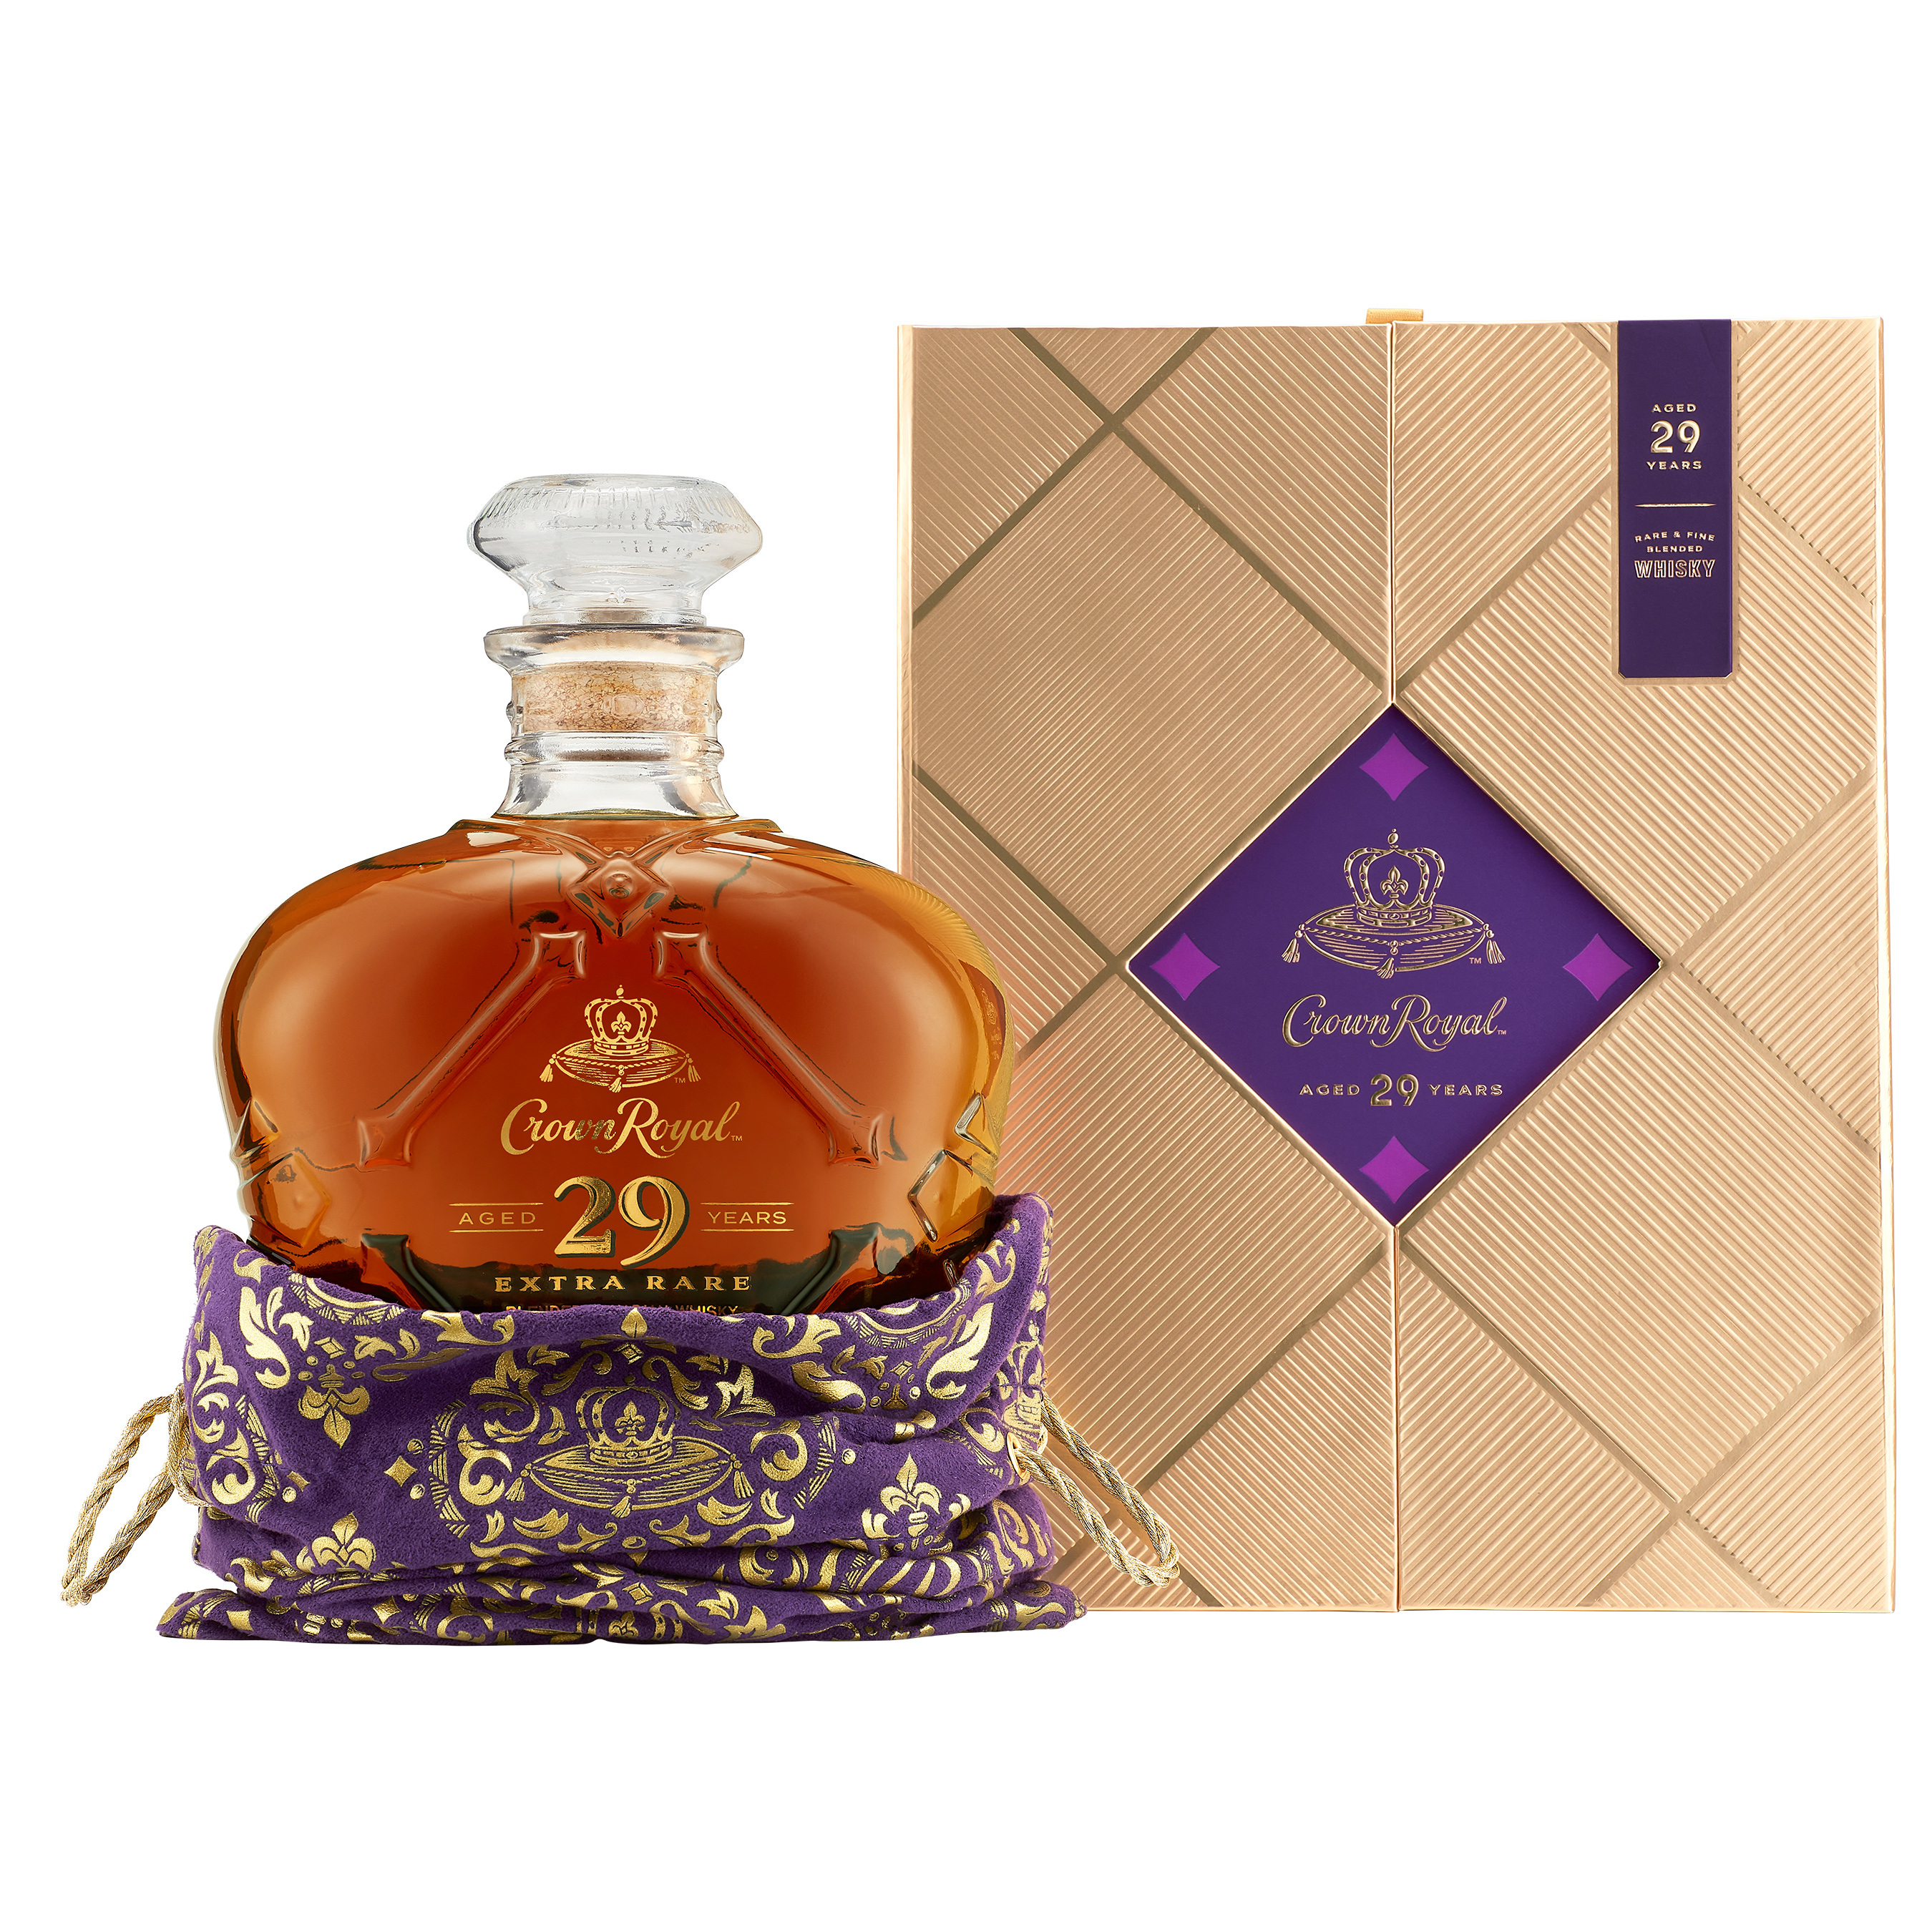 Only 6,000 bottles of Crown Royal Aged 29 Years are available.